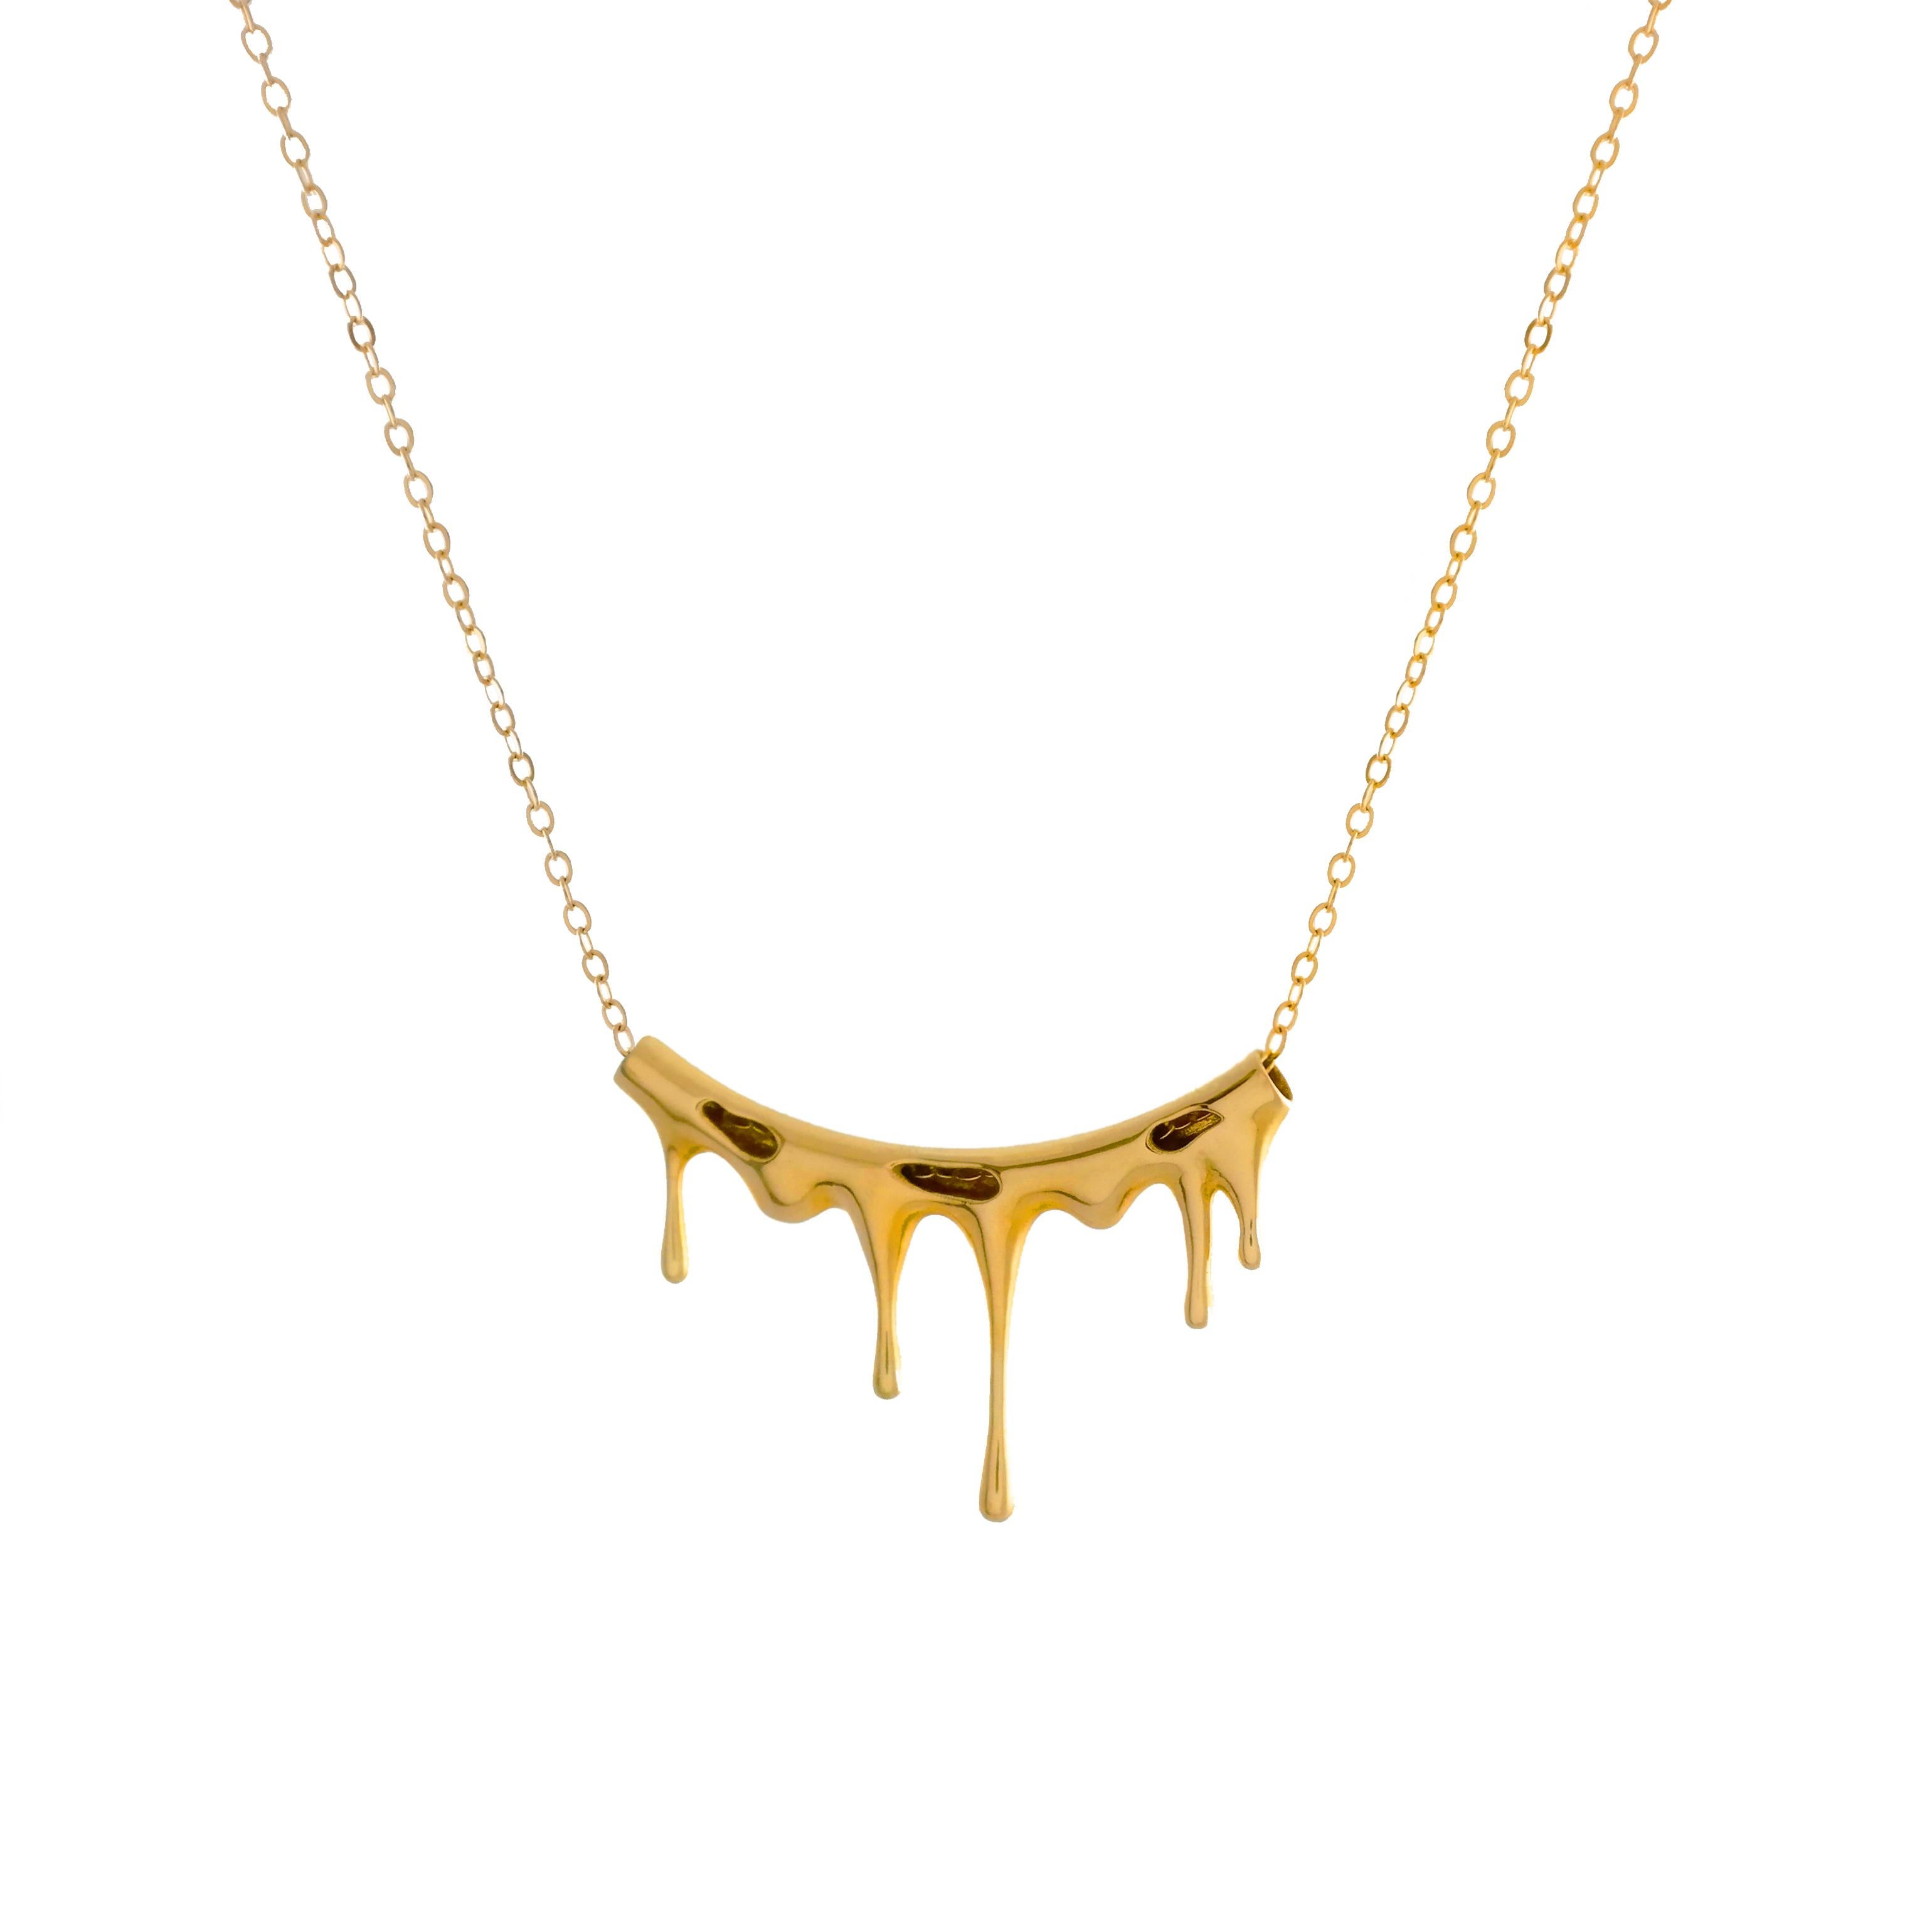 Dripping 24k Gold Vermeil Necklace

Premium Quality Materials:
• 24K Gold Vermeil: Made in 925 Sterling Silver and coated with a thick layer of 24K Gold to 2.5 Microns thickness
• Pendant: Approximately 52mm (2in) Wide by 38mm (1.5in) High
• Chain: